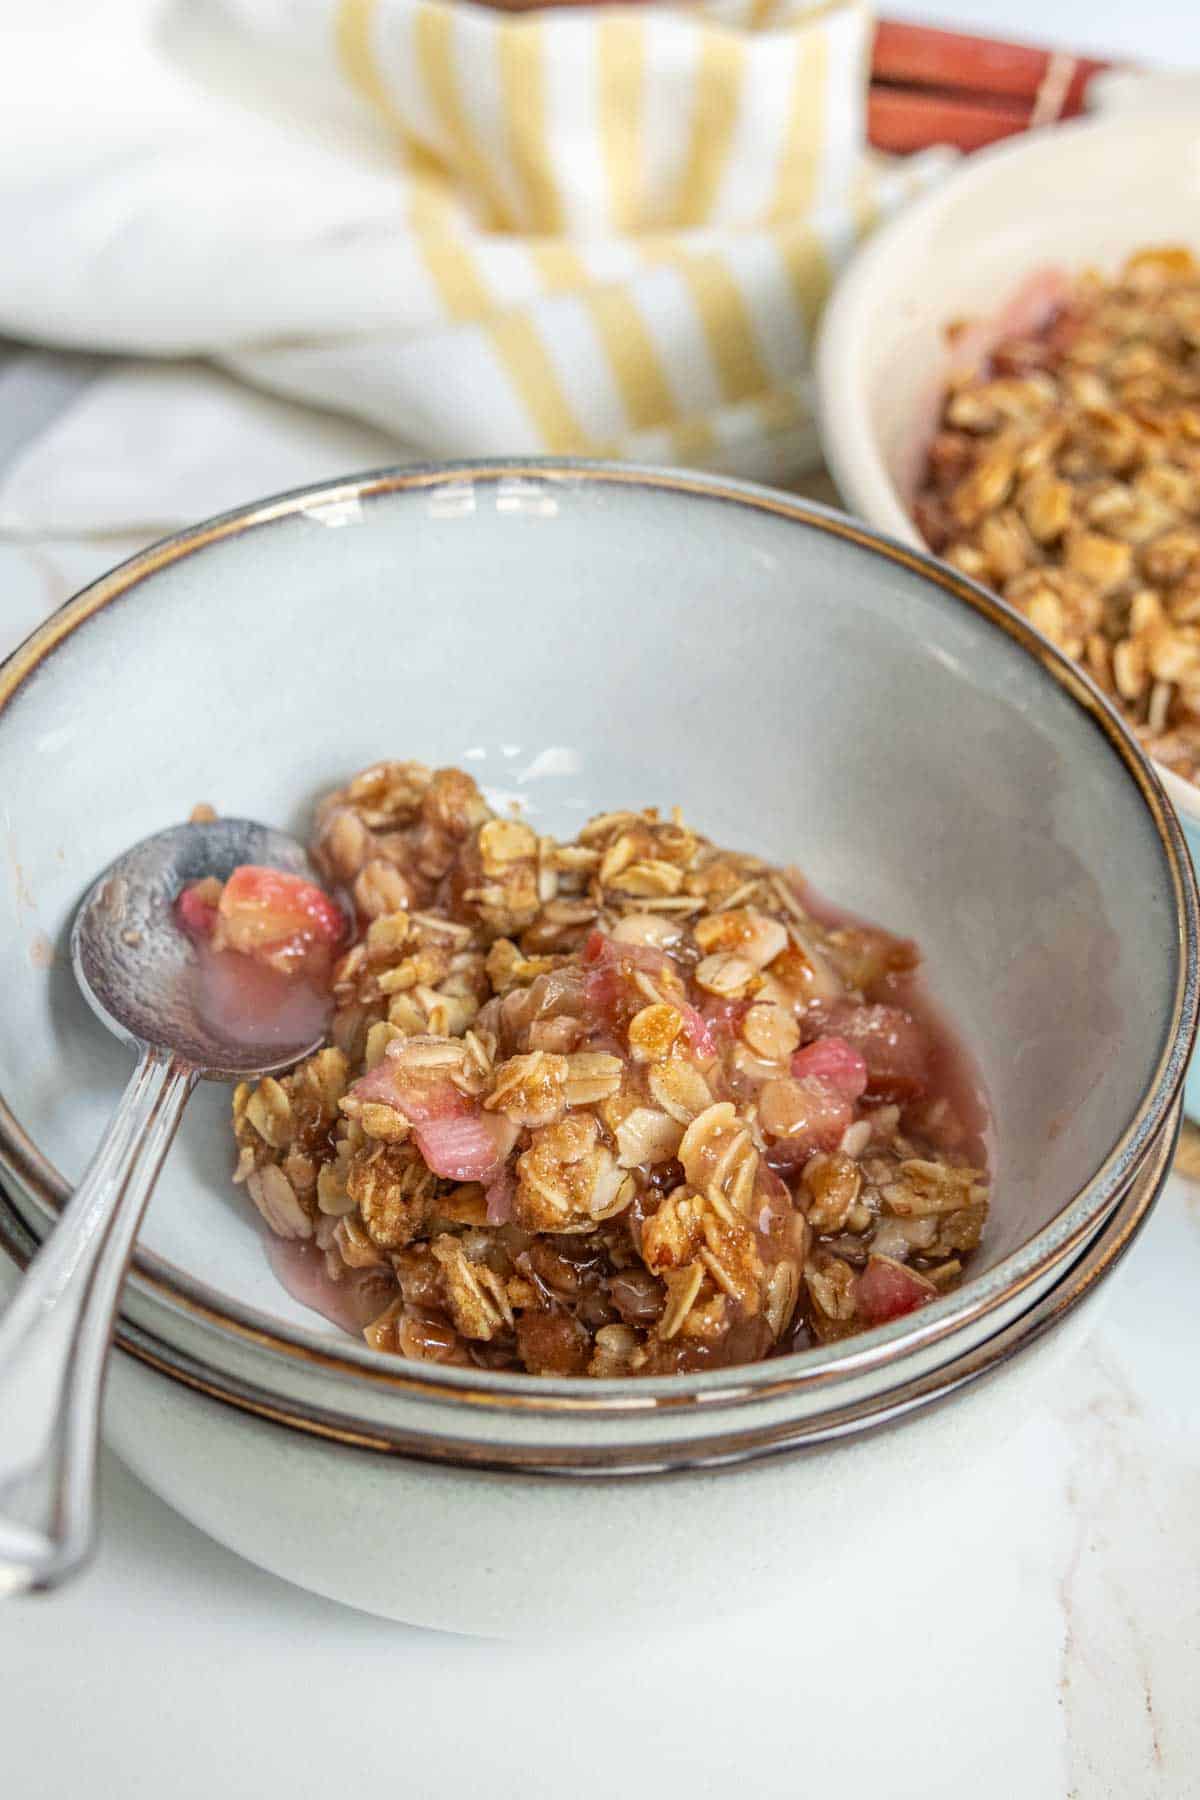 A bowl of rhubarb crisp, accompanied by a spoon, on a white surface with a striped napkin in the background.